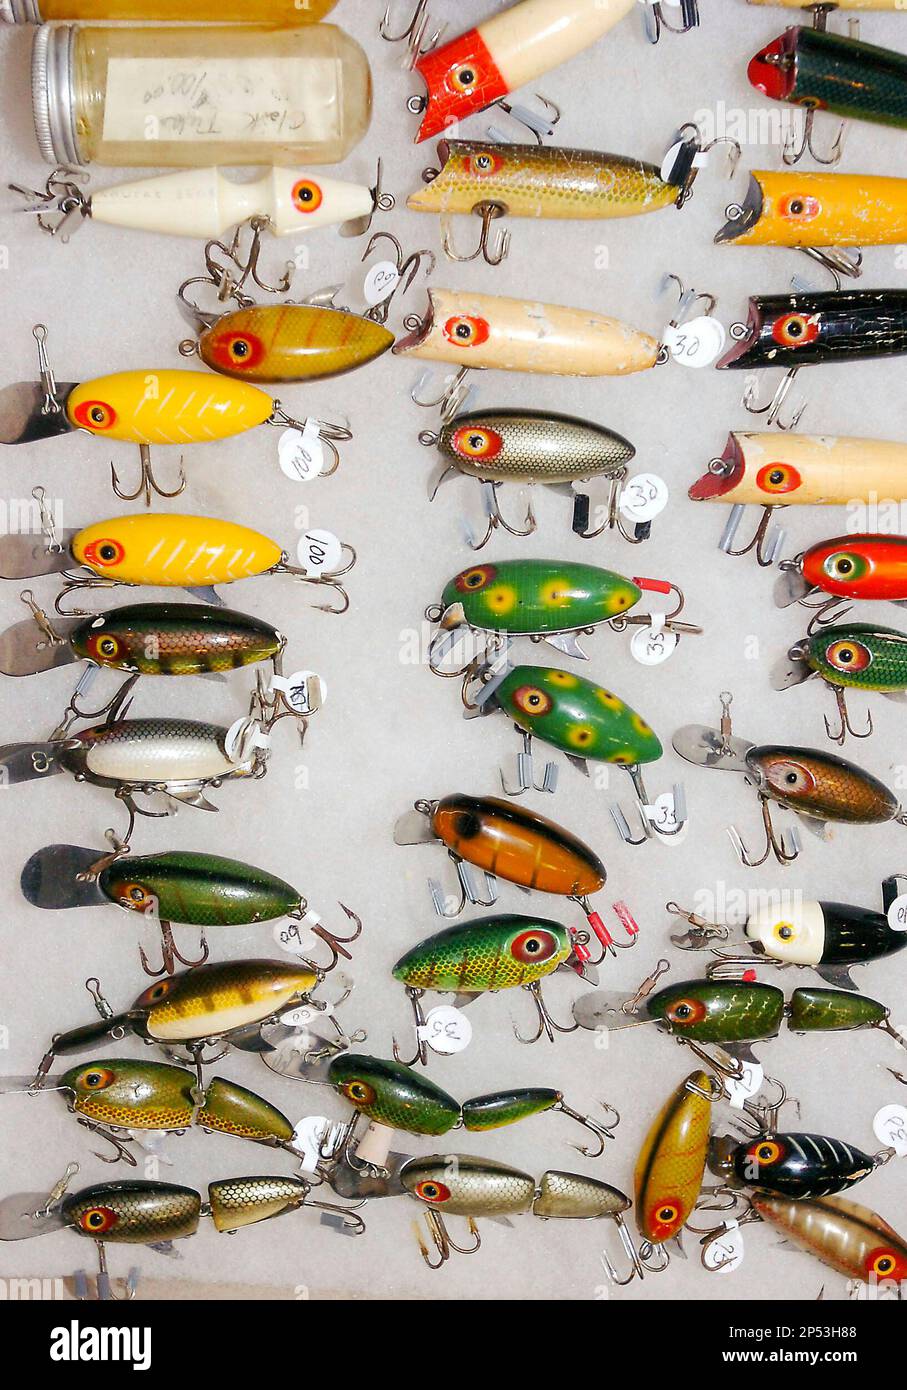 C.A. Clark's fishing lures are on display at the 18th annual River